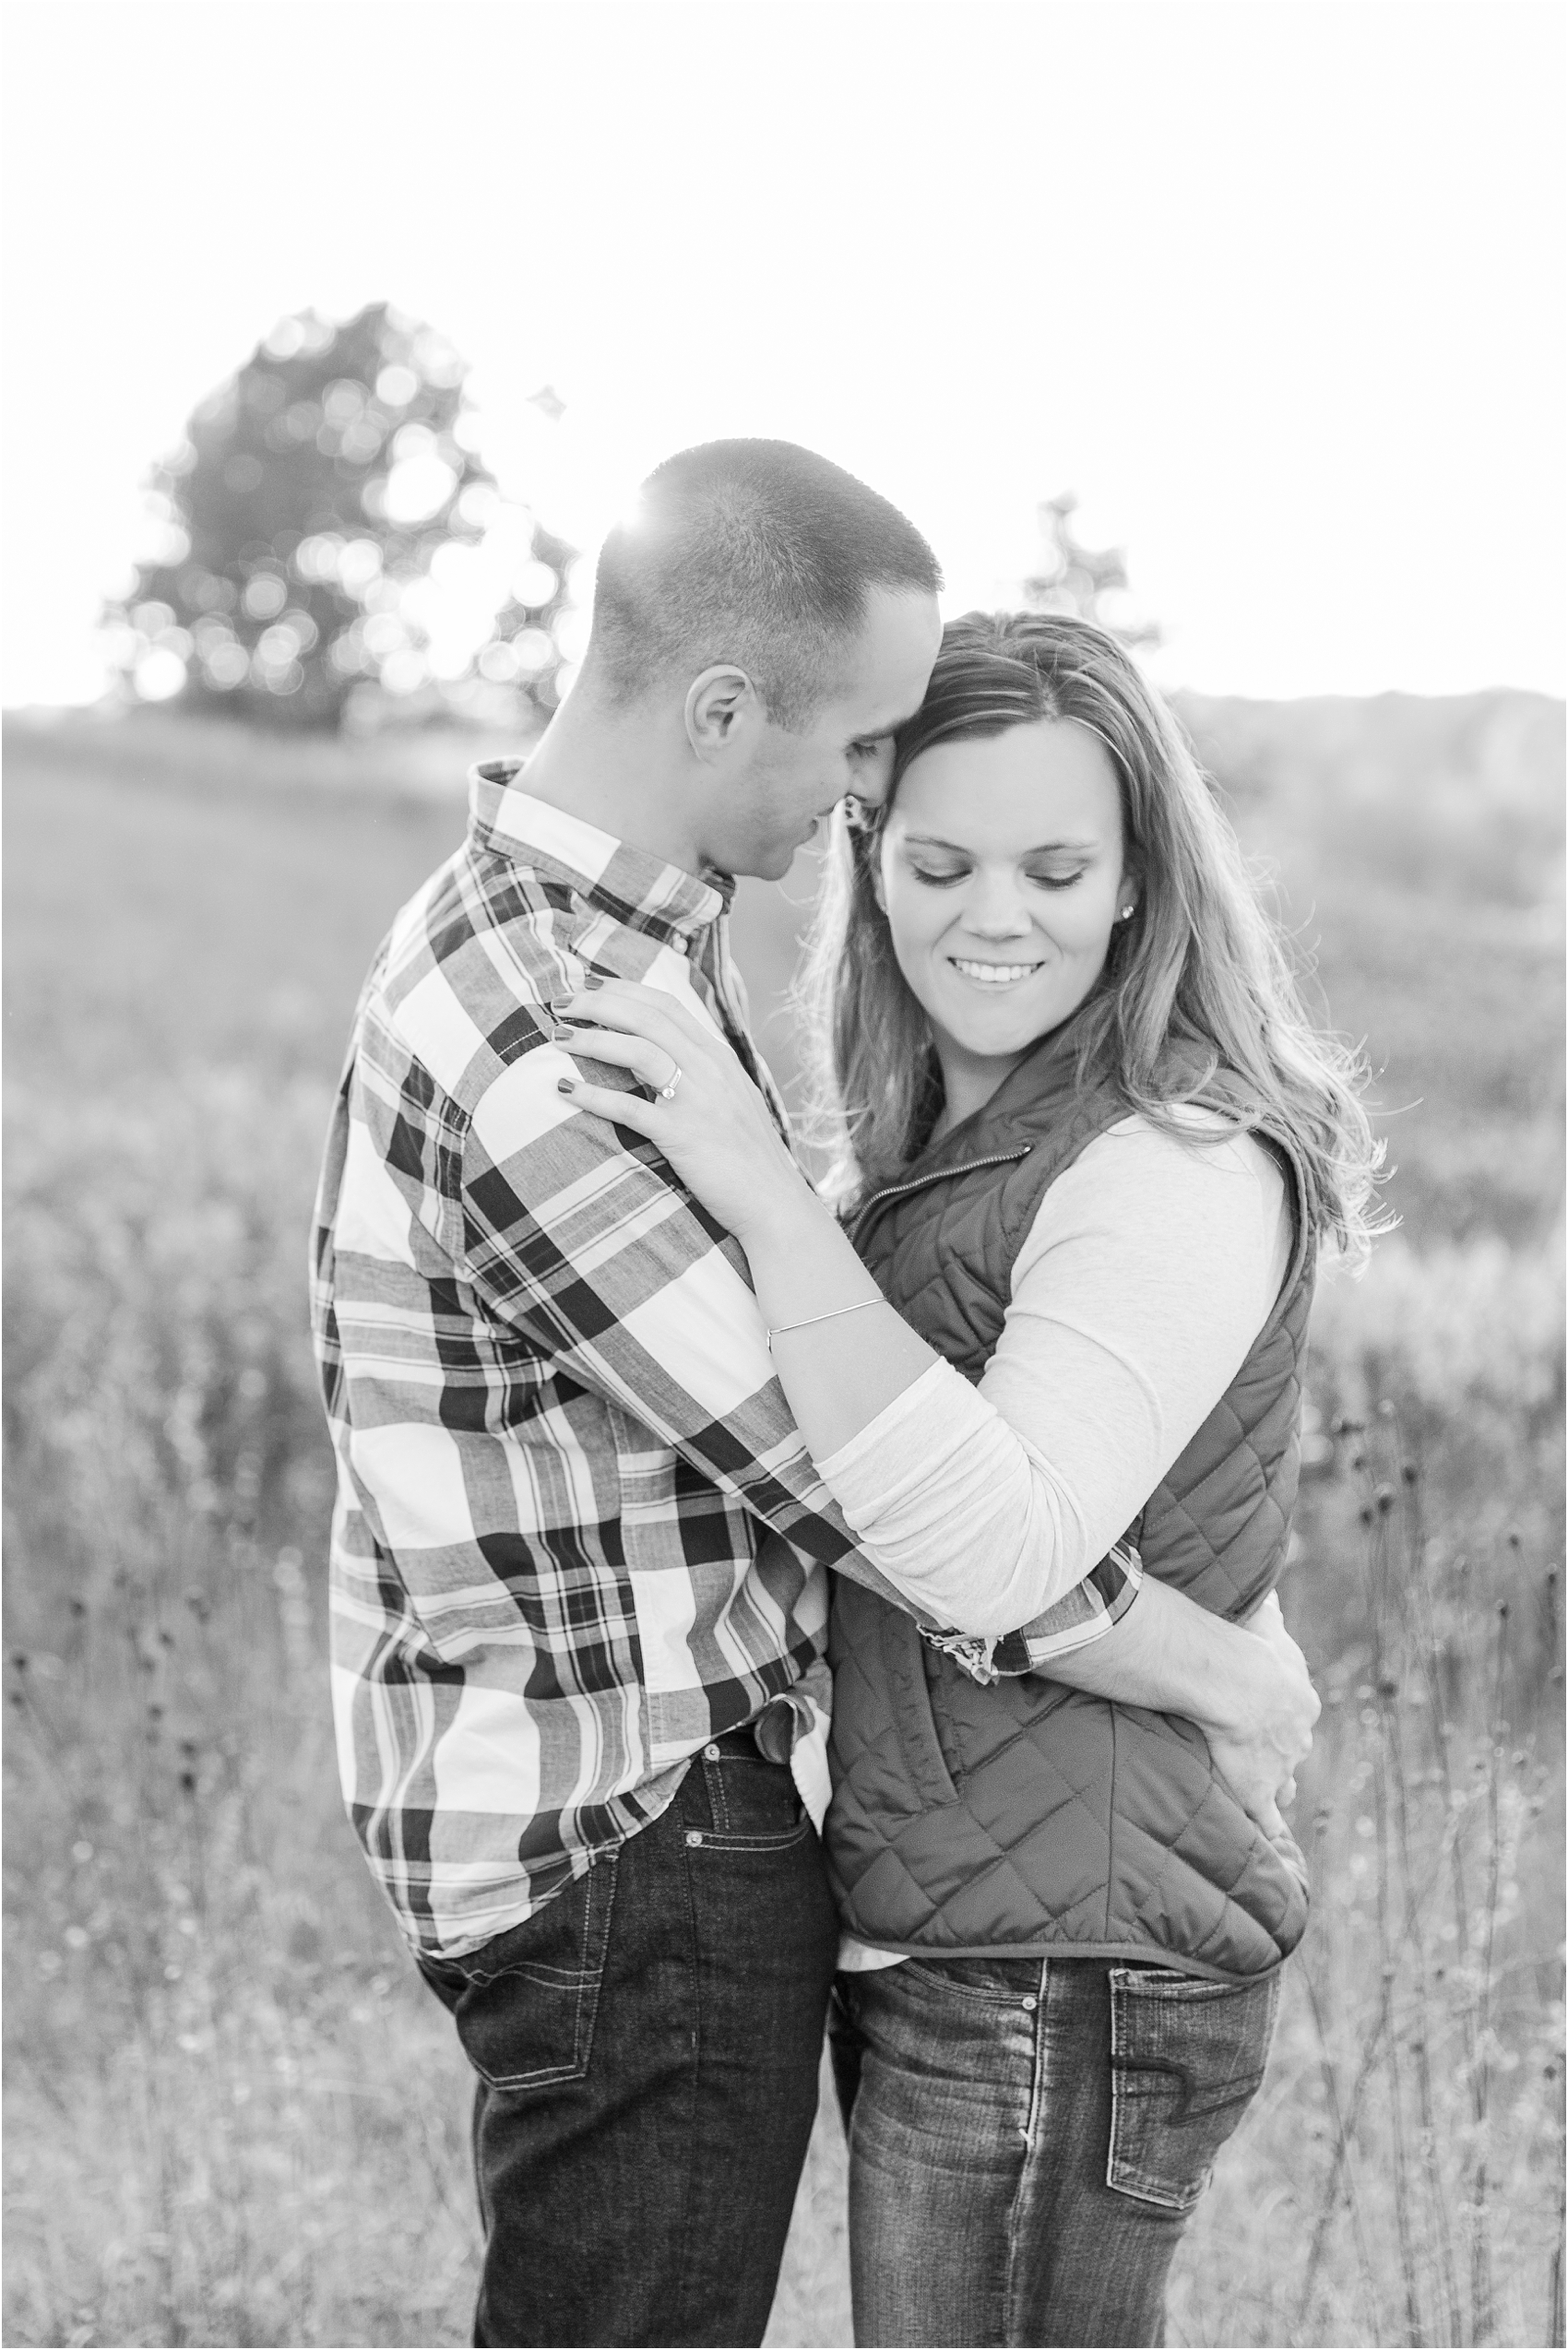 romantic-fall-engagement-photos-at-indian-springs-metropark-in-clarkston-mi-by-courtney-carolyn-photography_0013.jpg